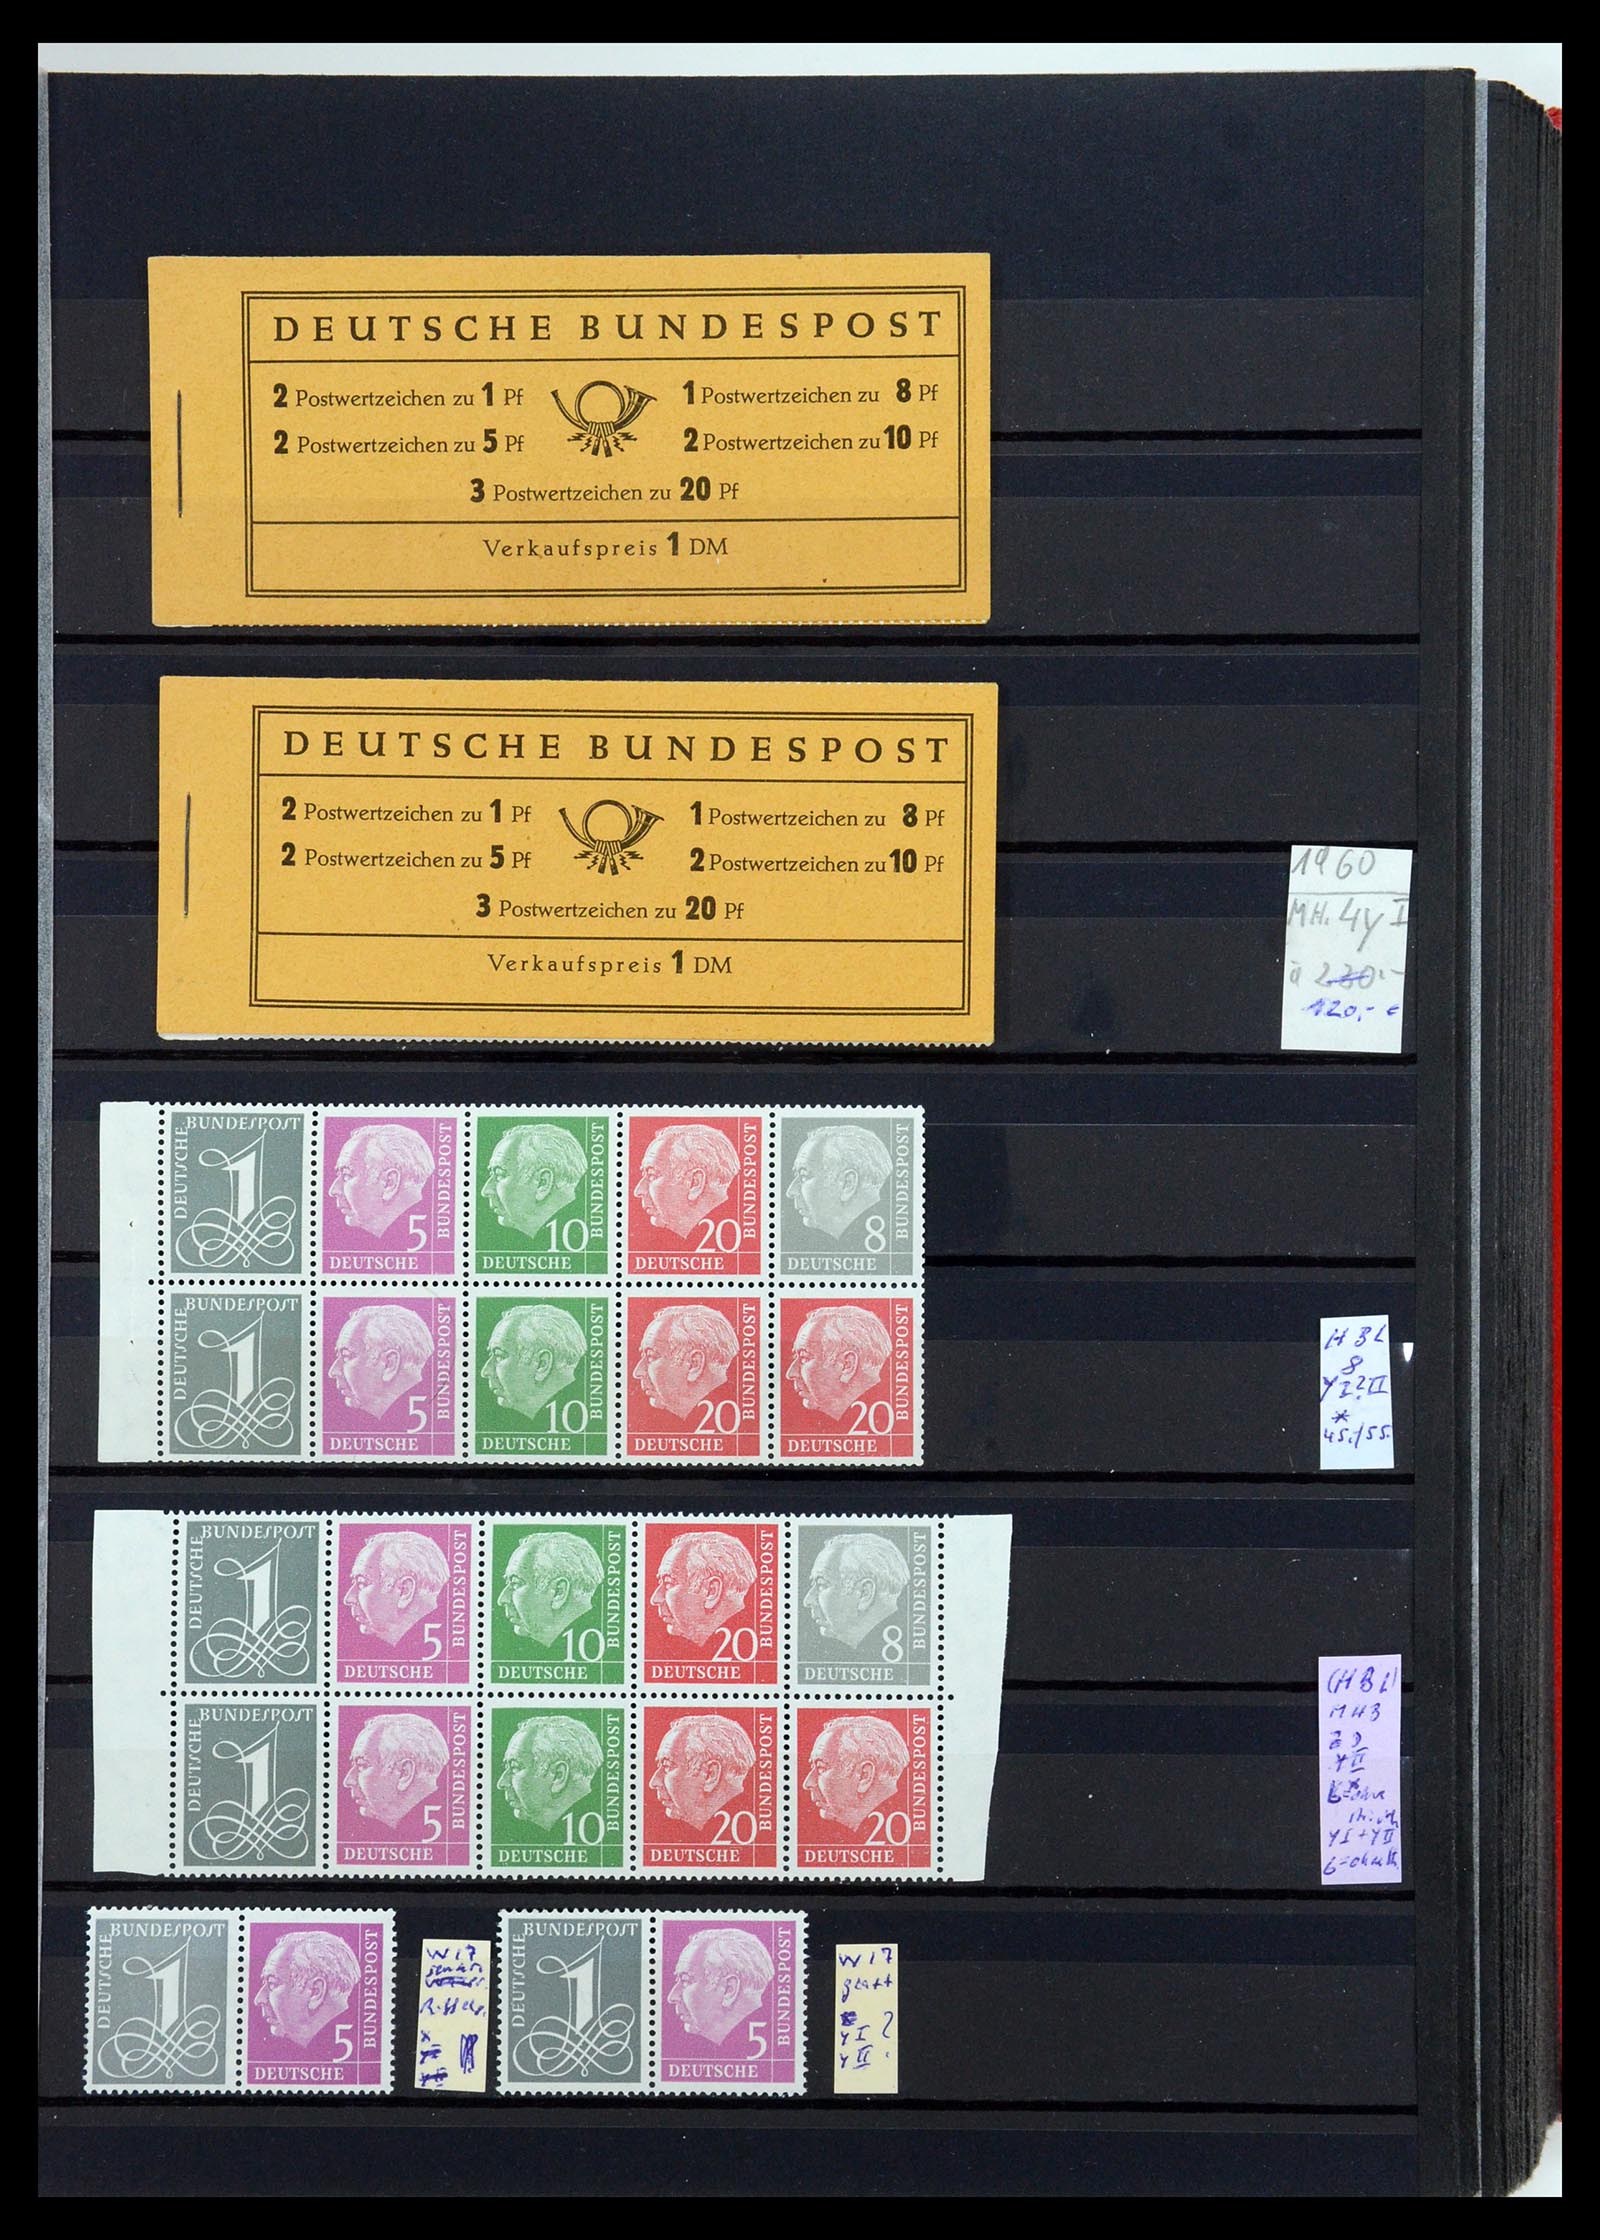 35356 005 - Stamp Collection 35356 Bundespost stamp booklets and combinations 1951-2